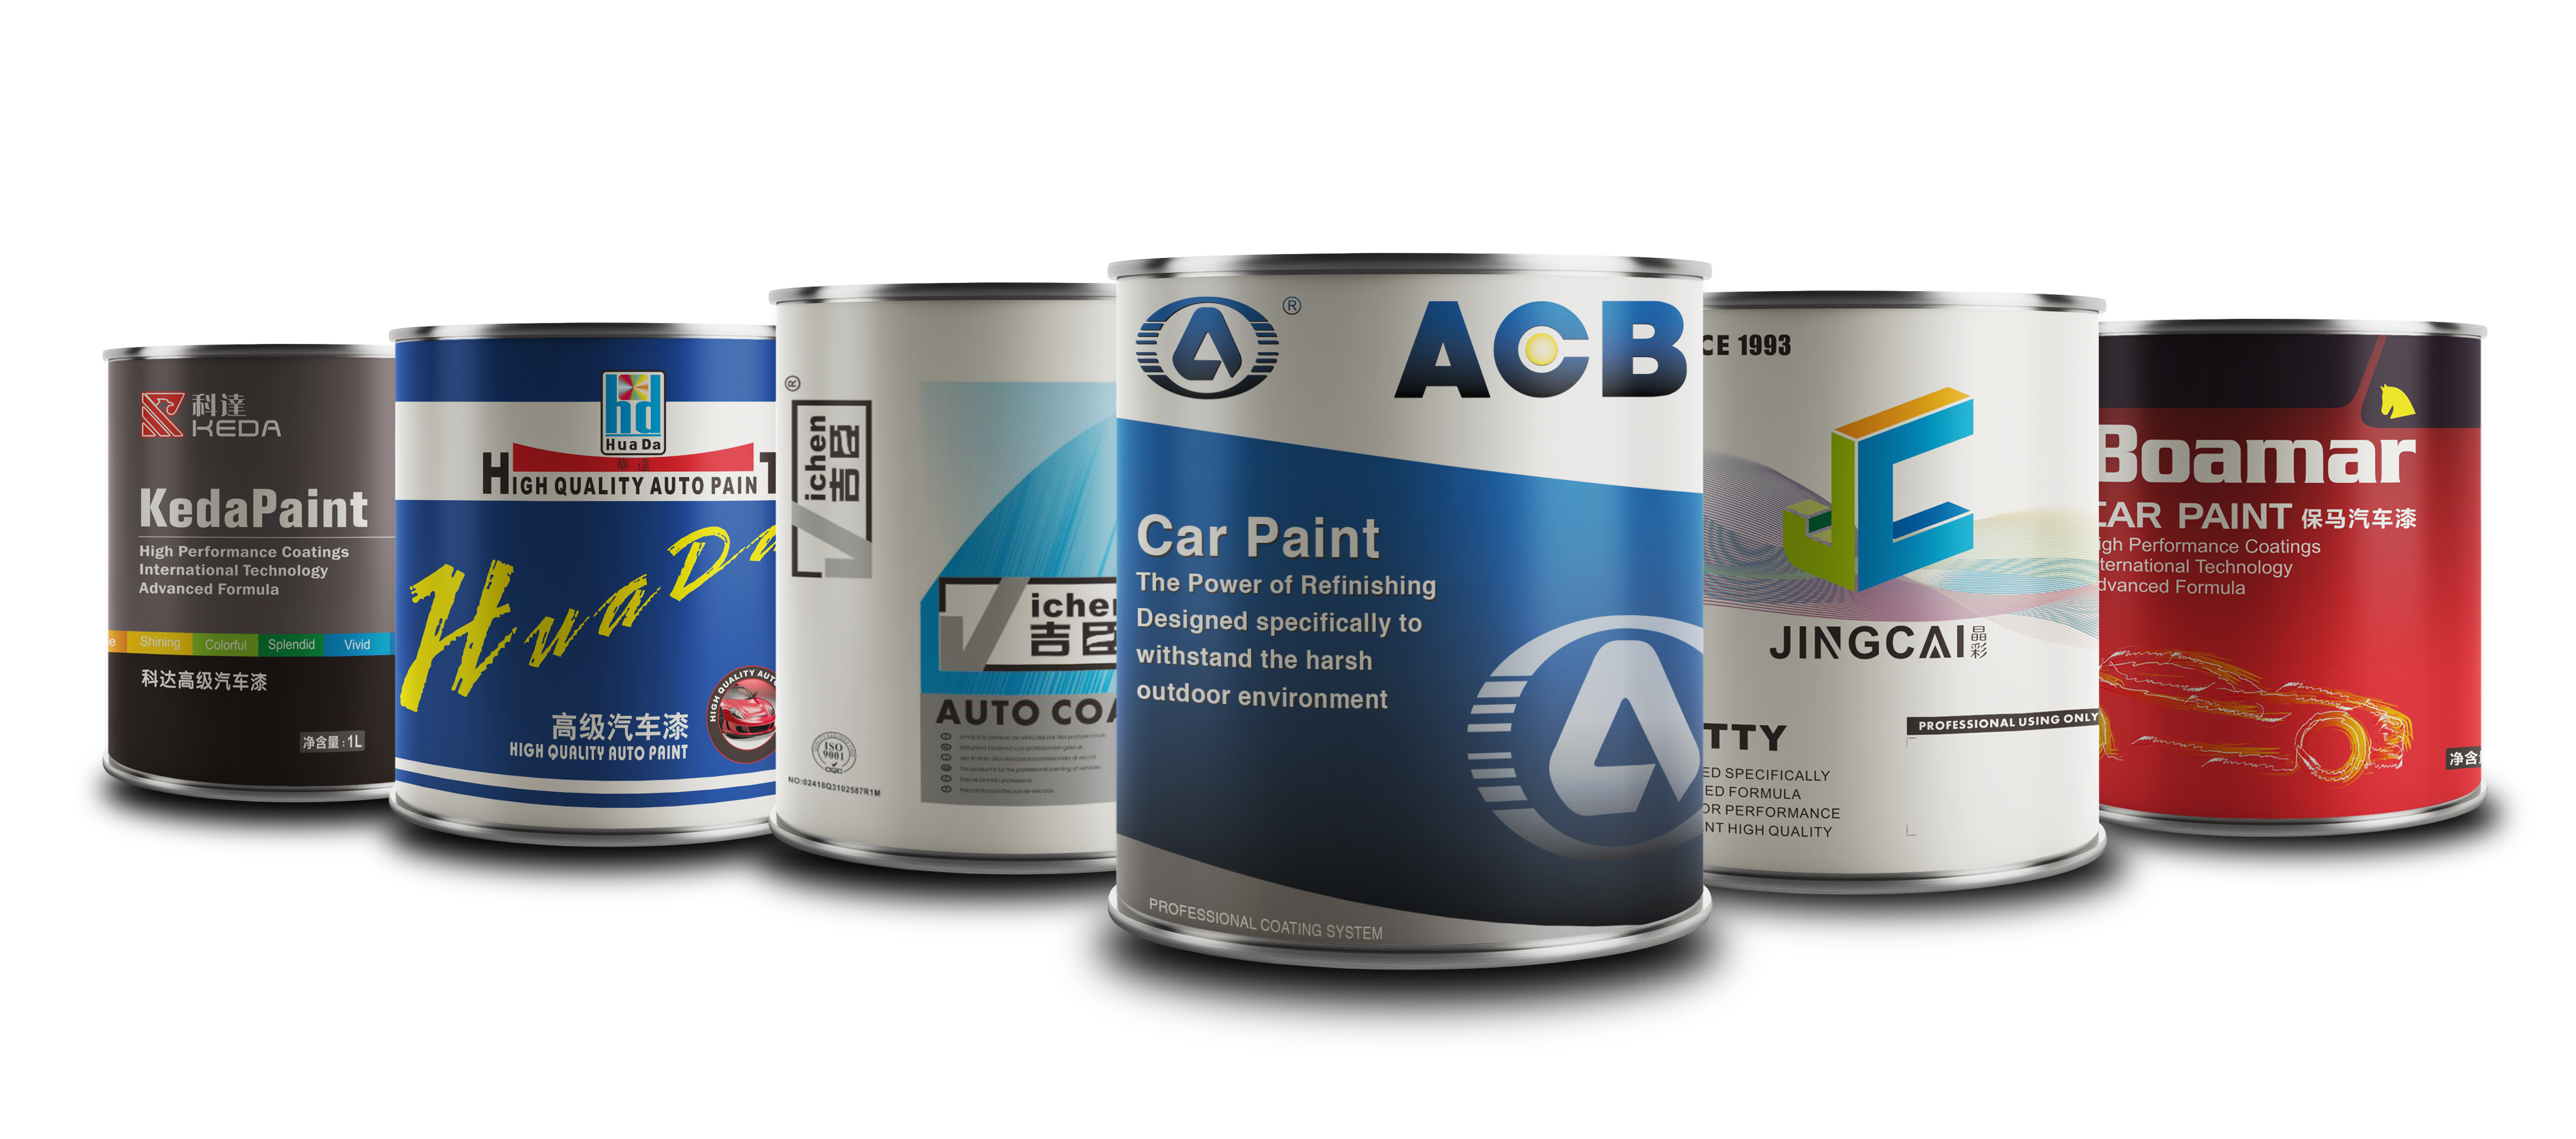 How should the automotive clearcoat on our cars be protected?